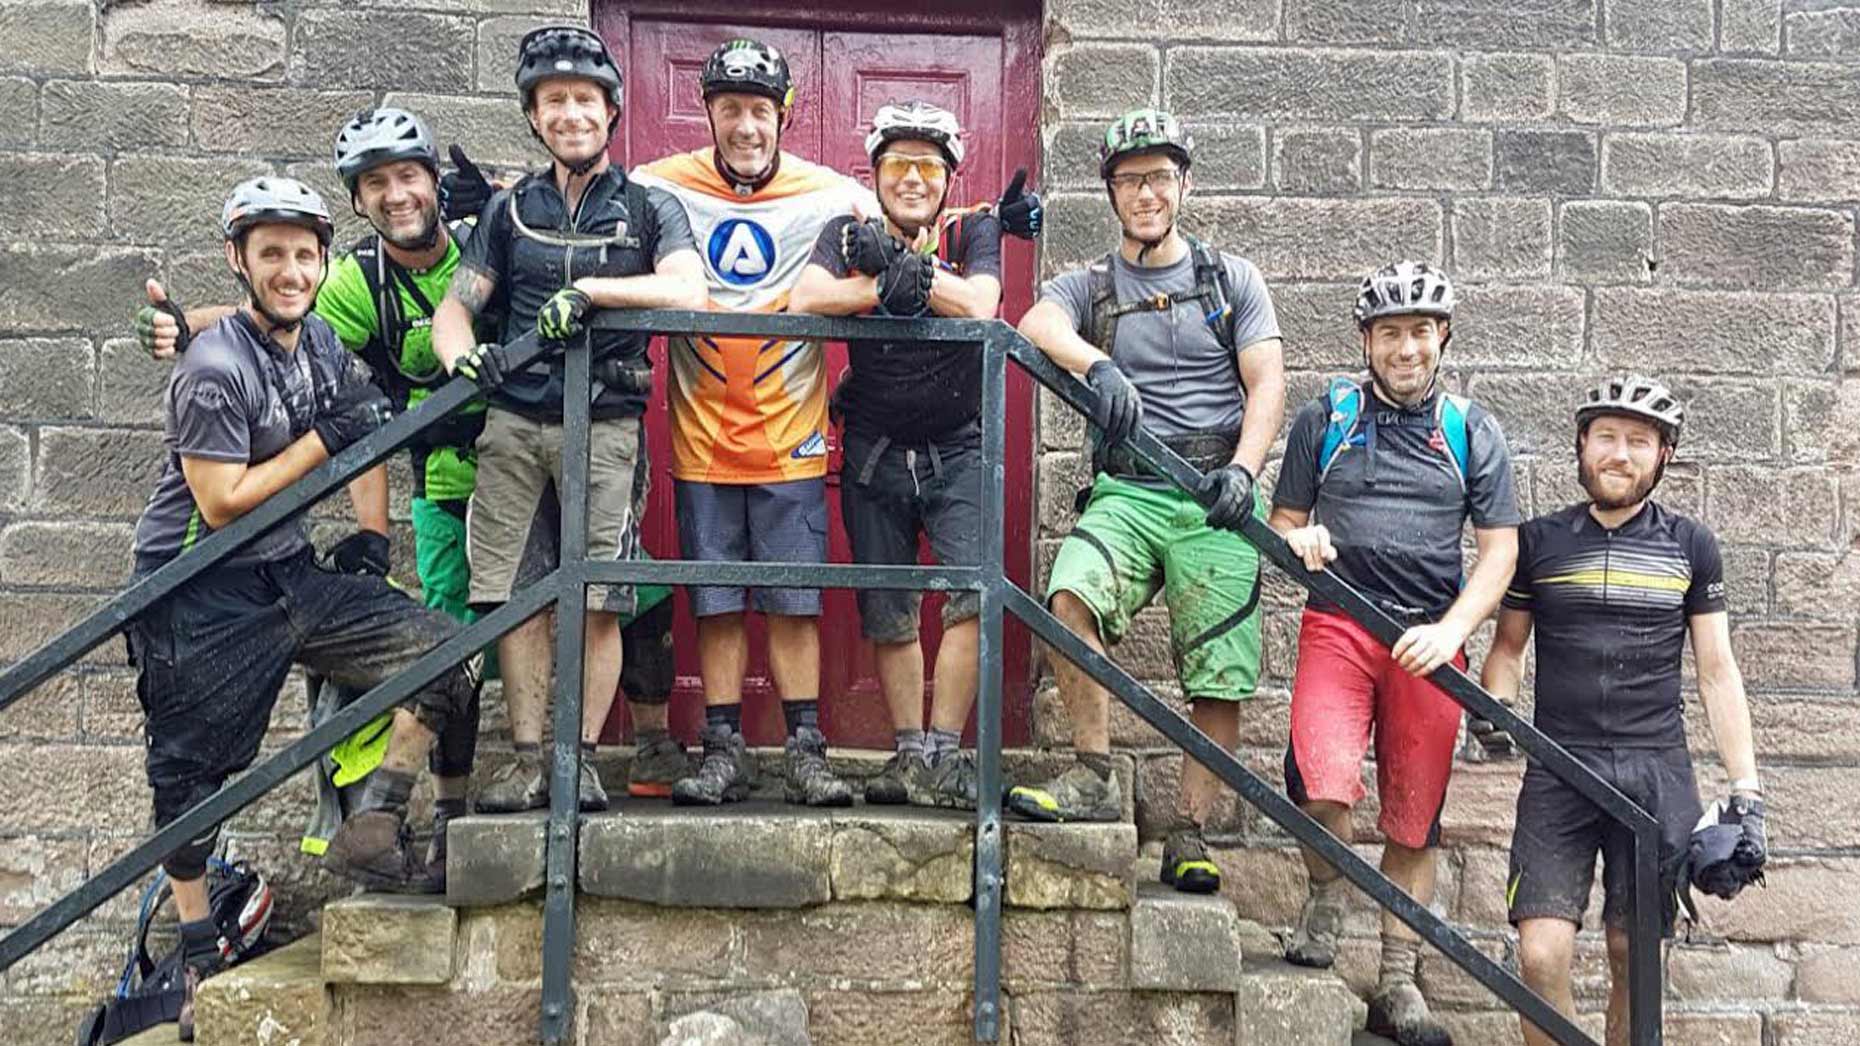 Rob Hudson (centre in orange shirt) with mountain biking friends who have so far raised more than £4,000 to thank Yorkshire Air Ambulance.